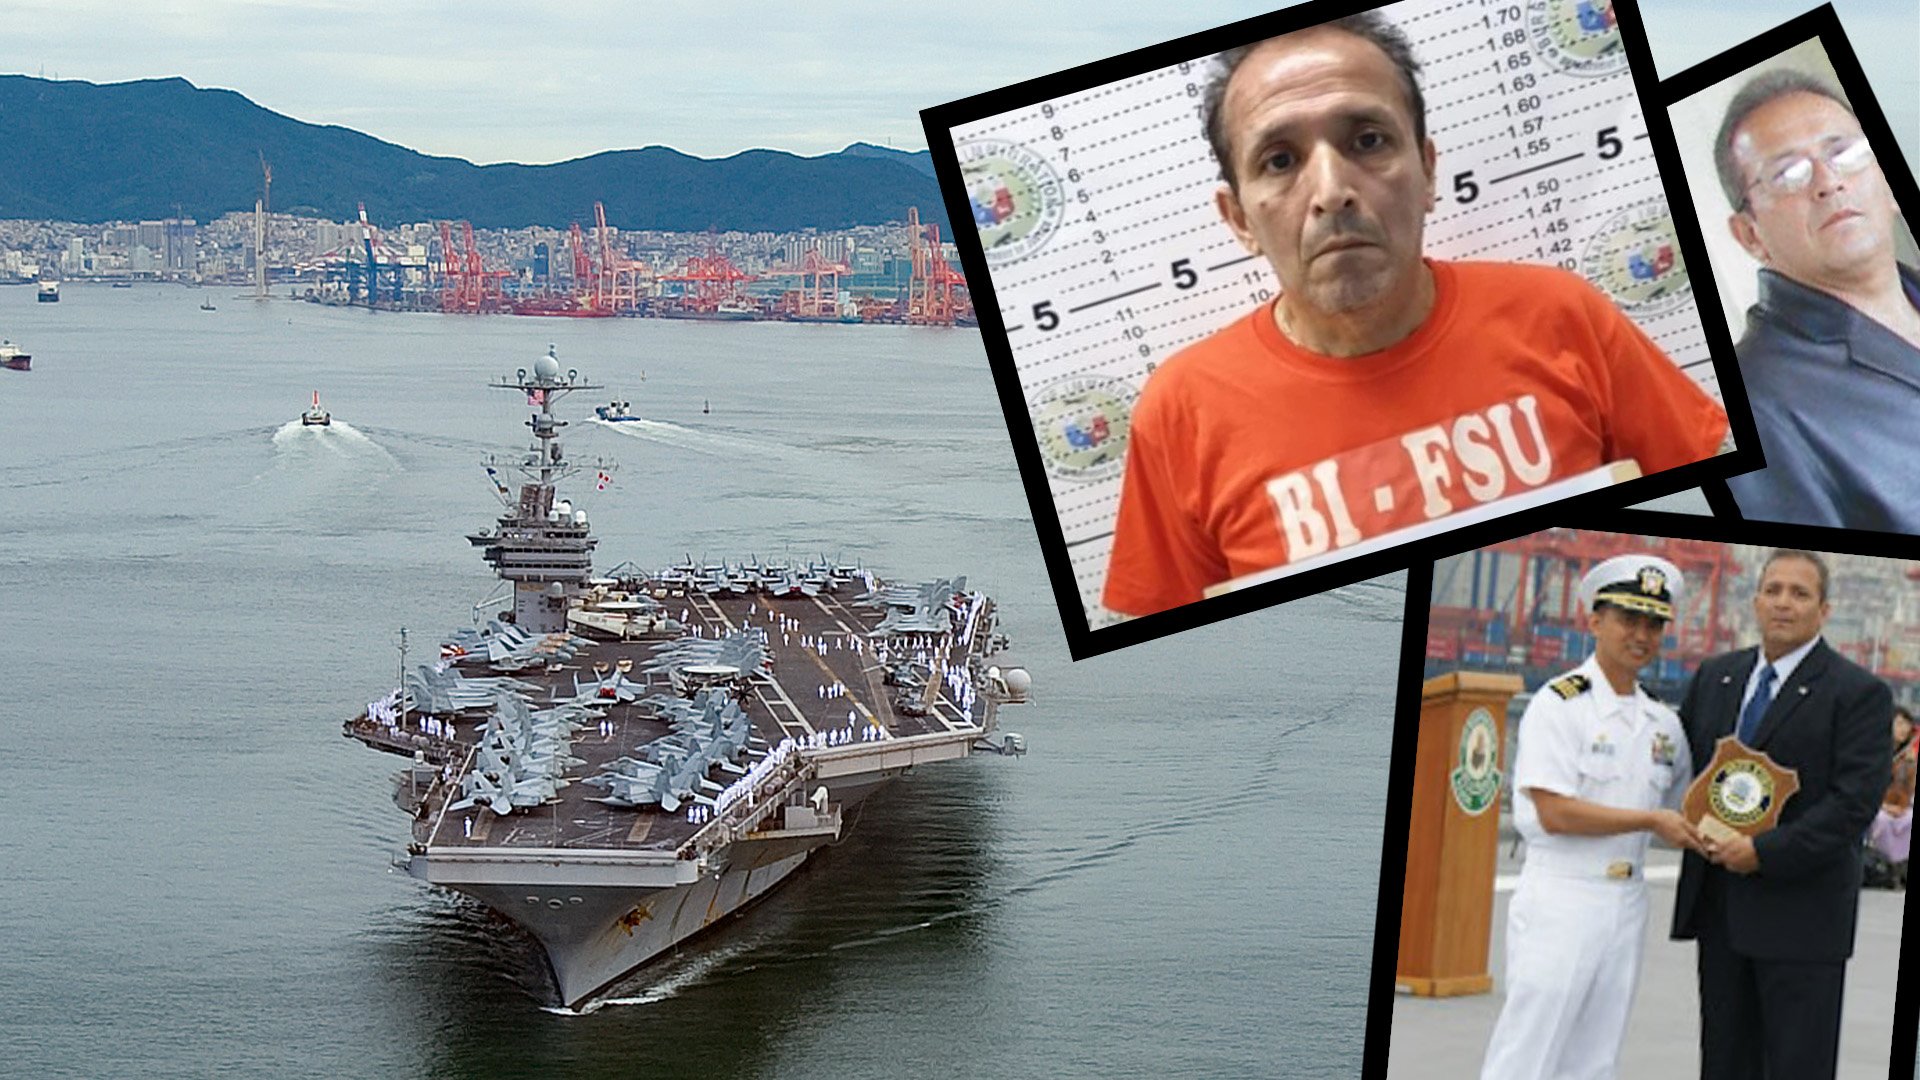 The former director of operations of the US Navy’s Military Sealift Command Office in Busan, South Korea, was sentenced Dec. 2 to five years in prison for his role in a bribery conspiracy and lying to federal investigators. Retired Marine Master Sgt. Xavier Fernando Monroy, 65, of Brentwood, New York, took bribes to slide confidential US Navy to a corrupt South Korean contractor. Coffee or Die Magazine composite.